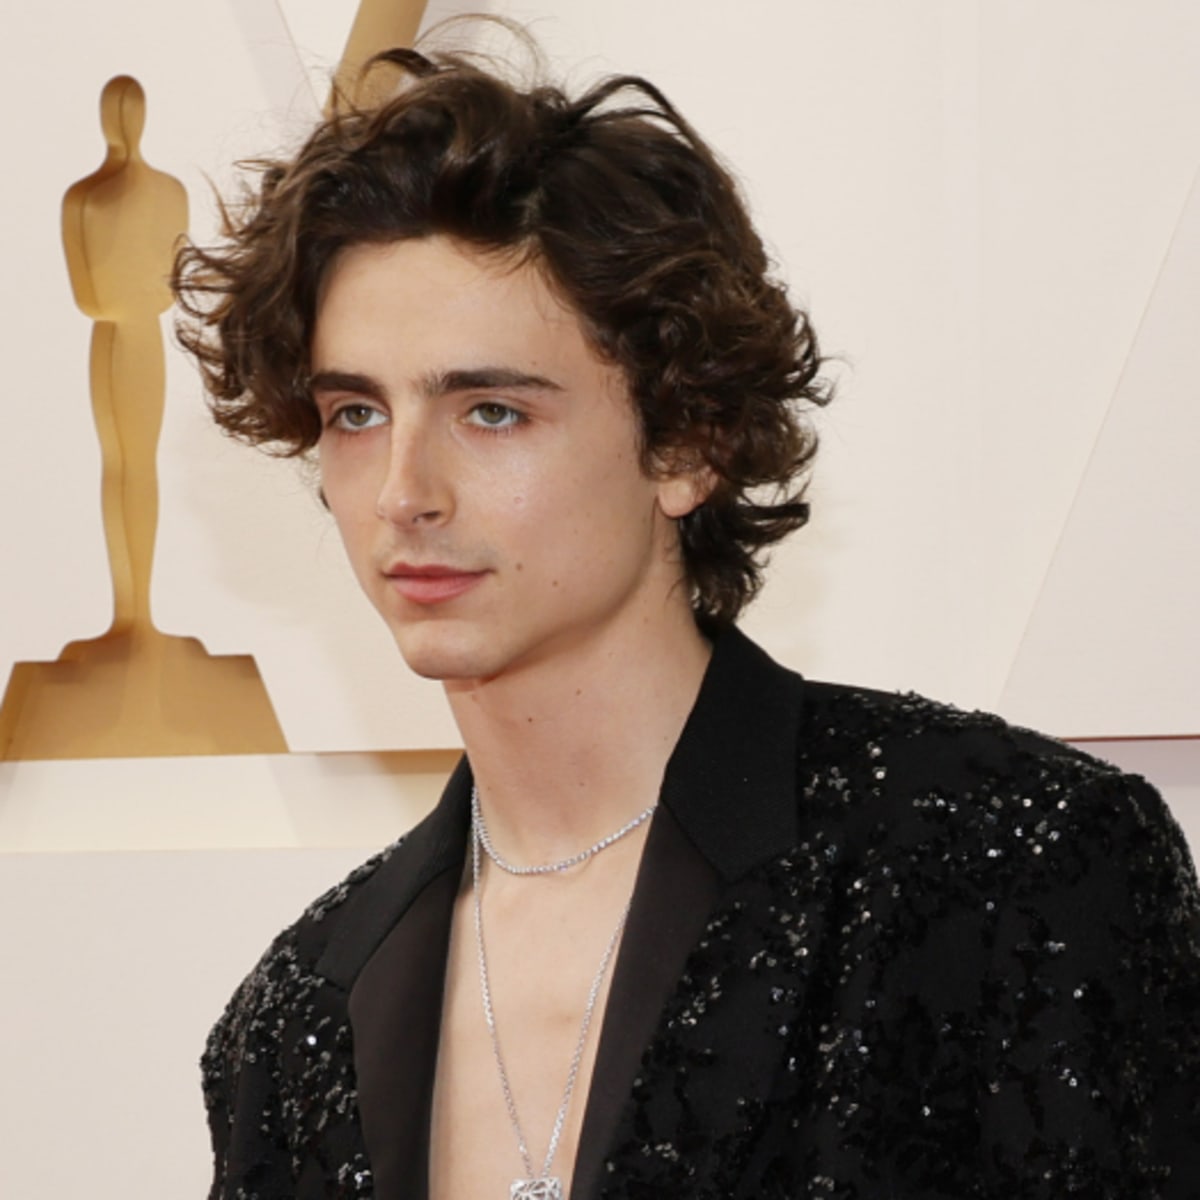 Why Timothée Chalamet Might Not Go to the Oscars